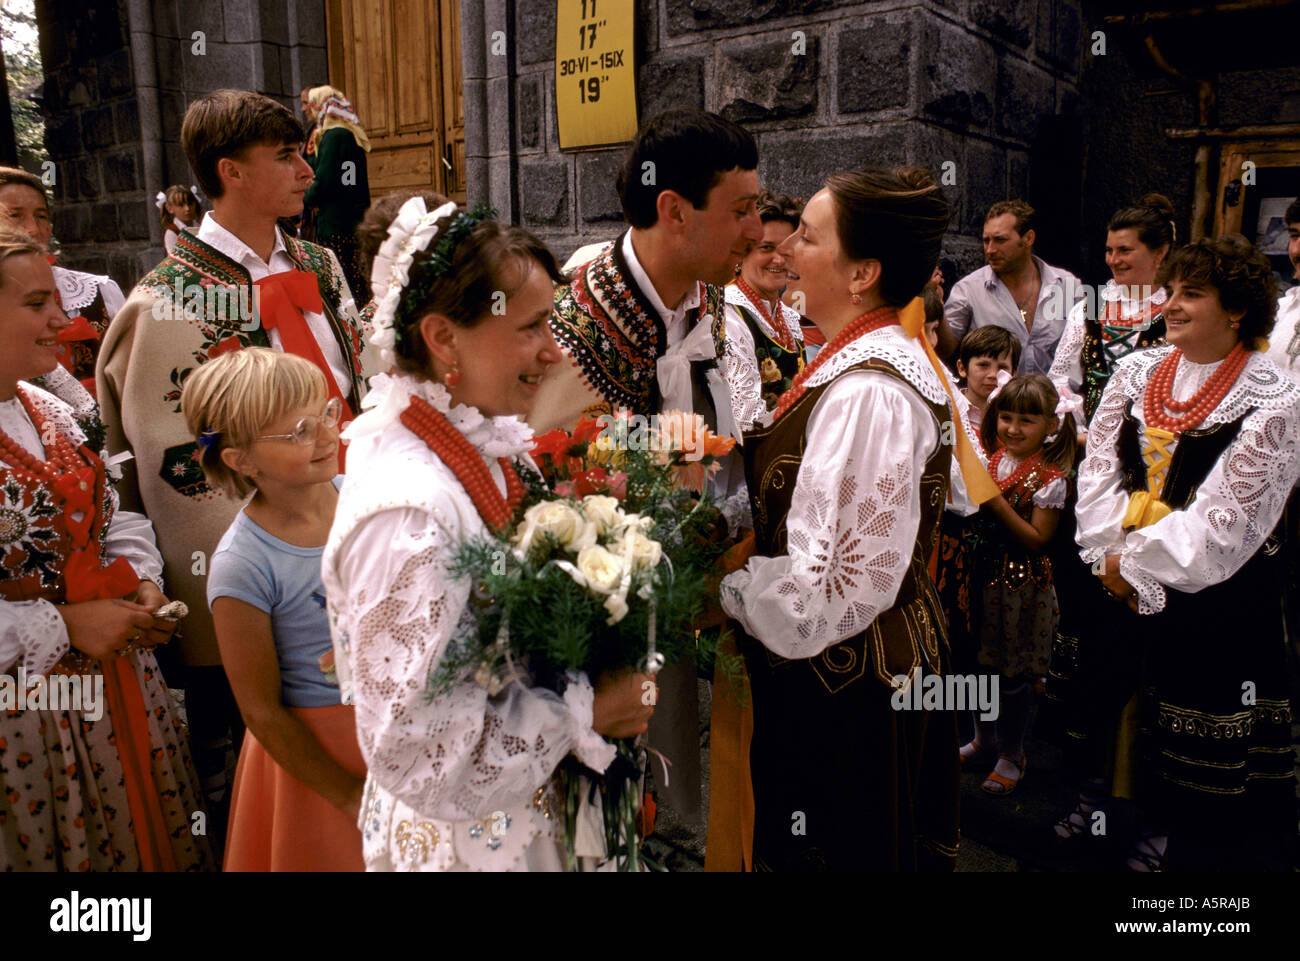 a traditional Gorale wedding in south west Poland, where the bride and groom greet the guest after the ceremony. Stock Photo